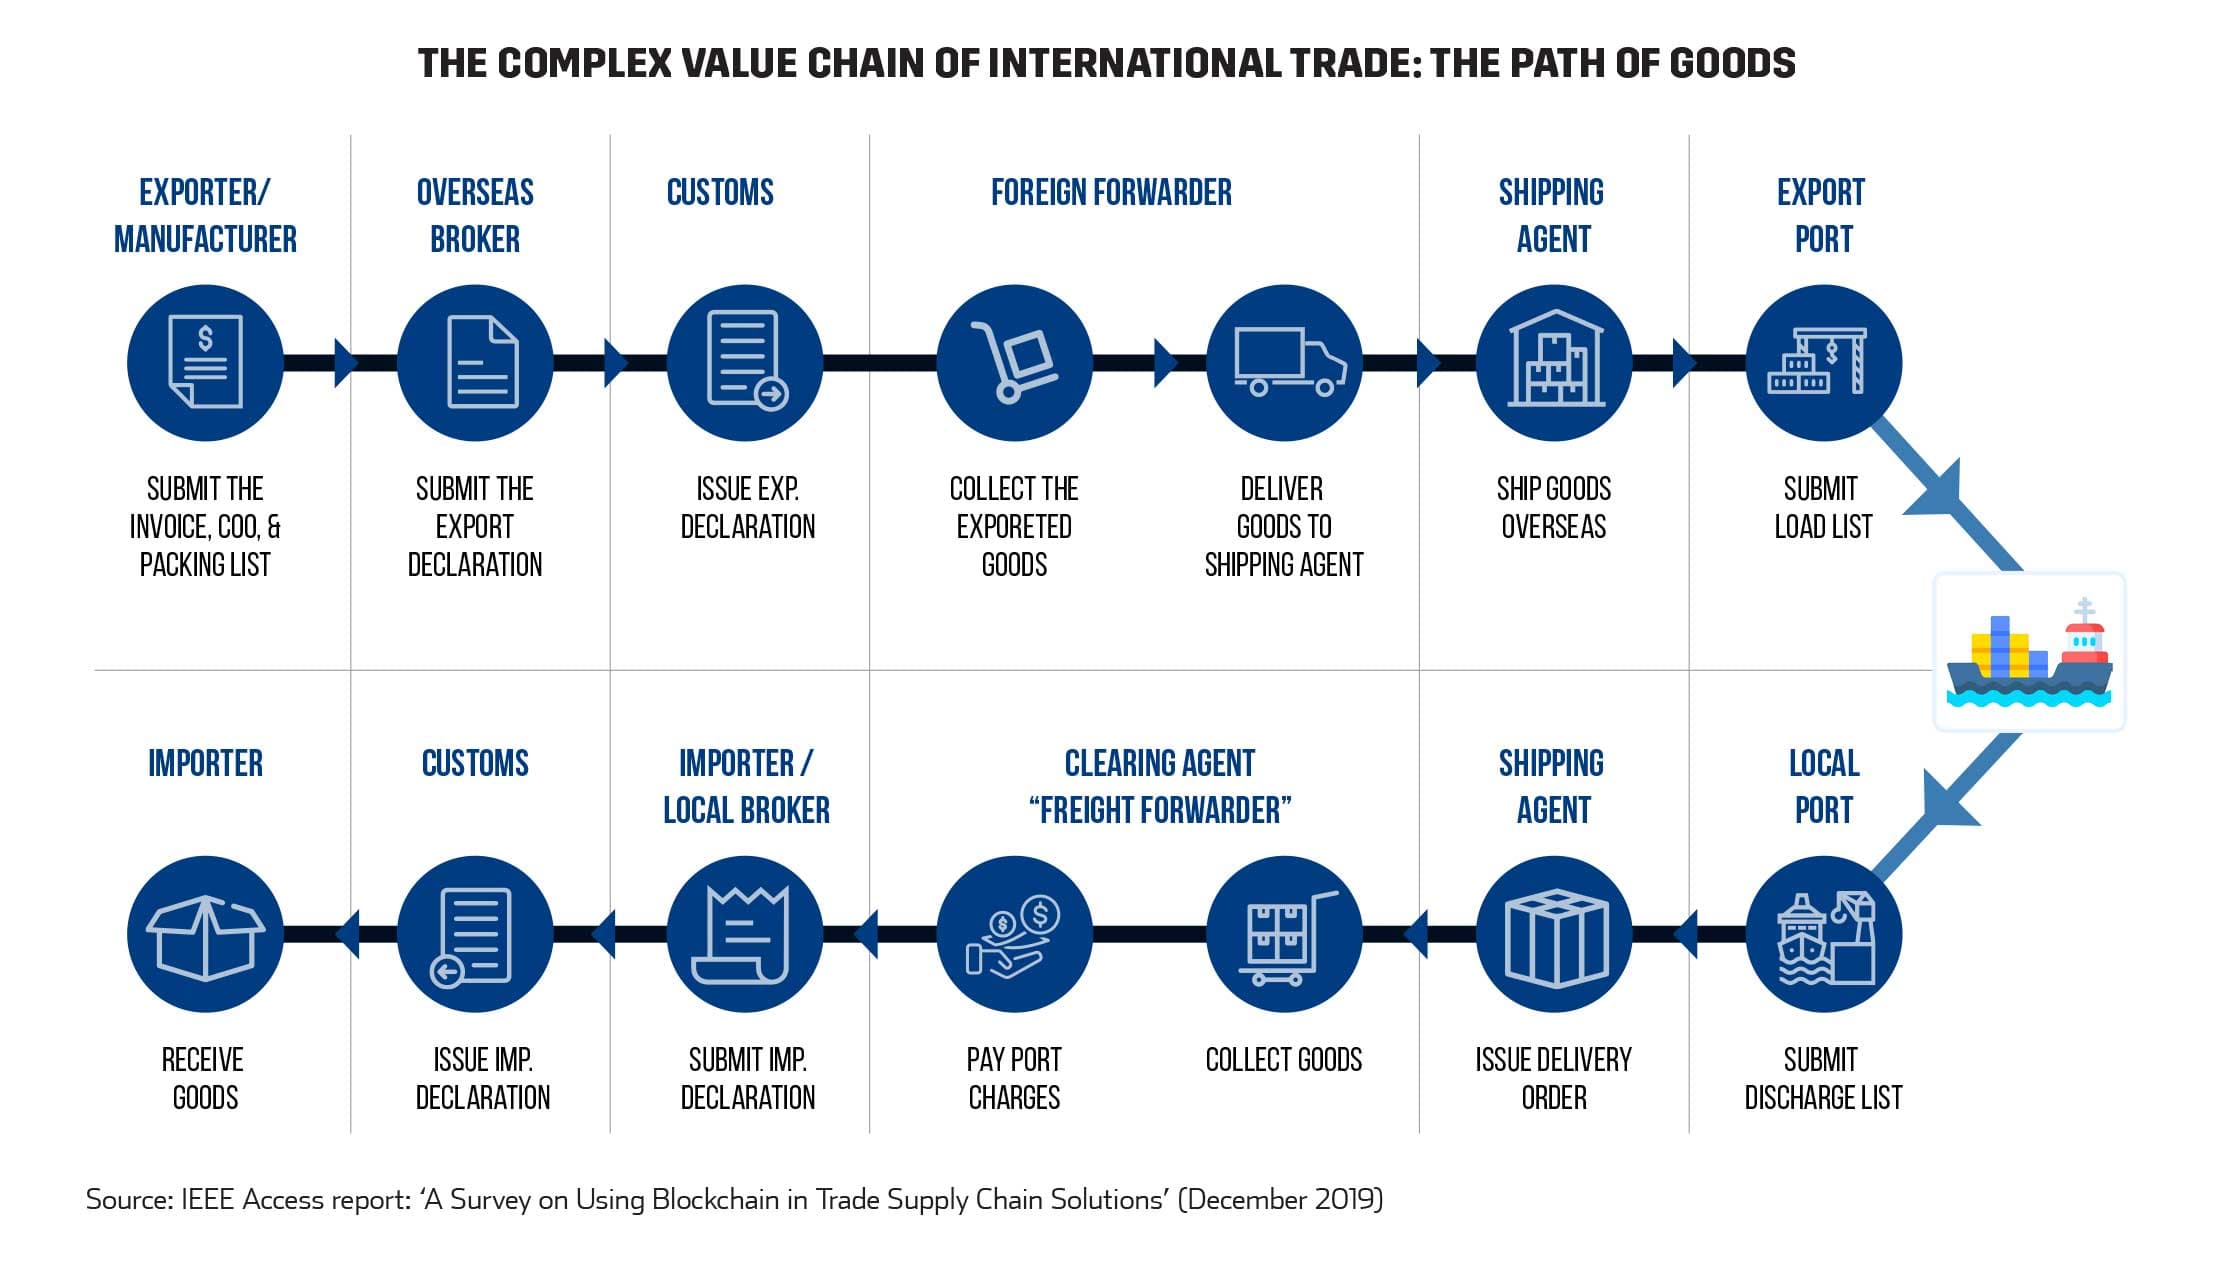 The Complex Value Chain of International Trade: The Path of Goods